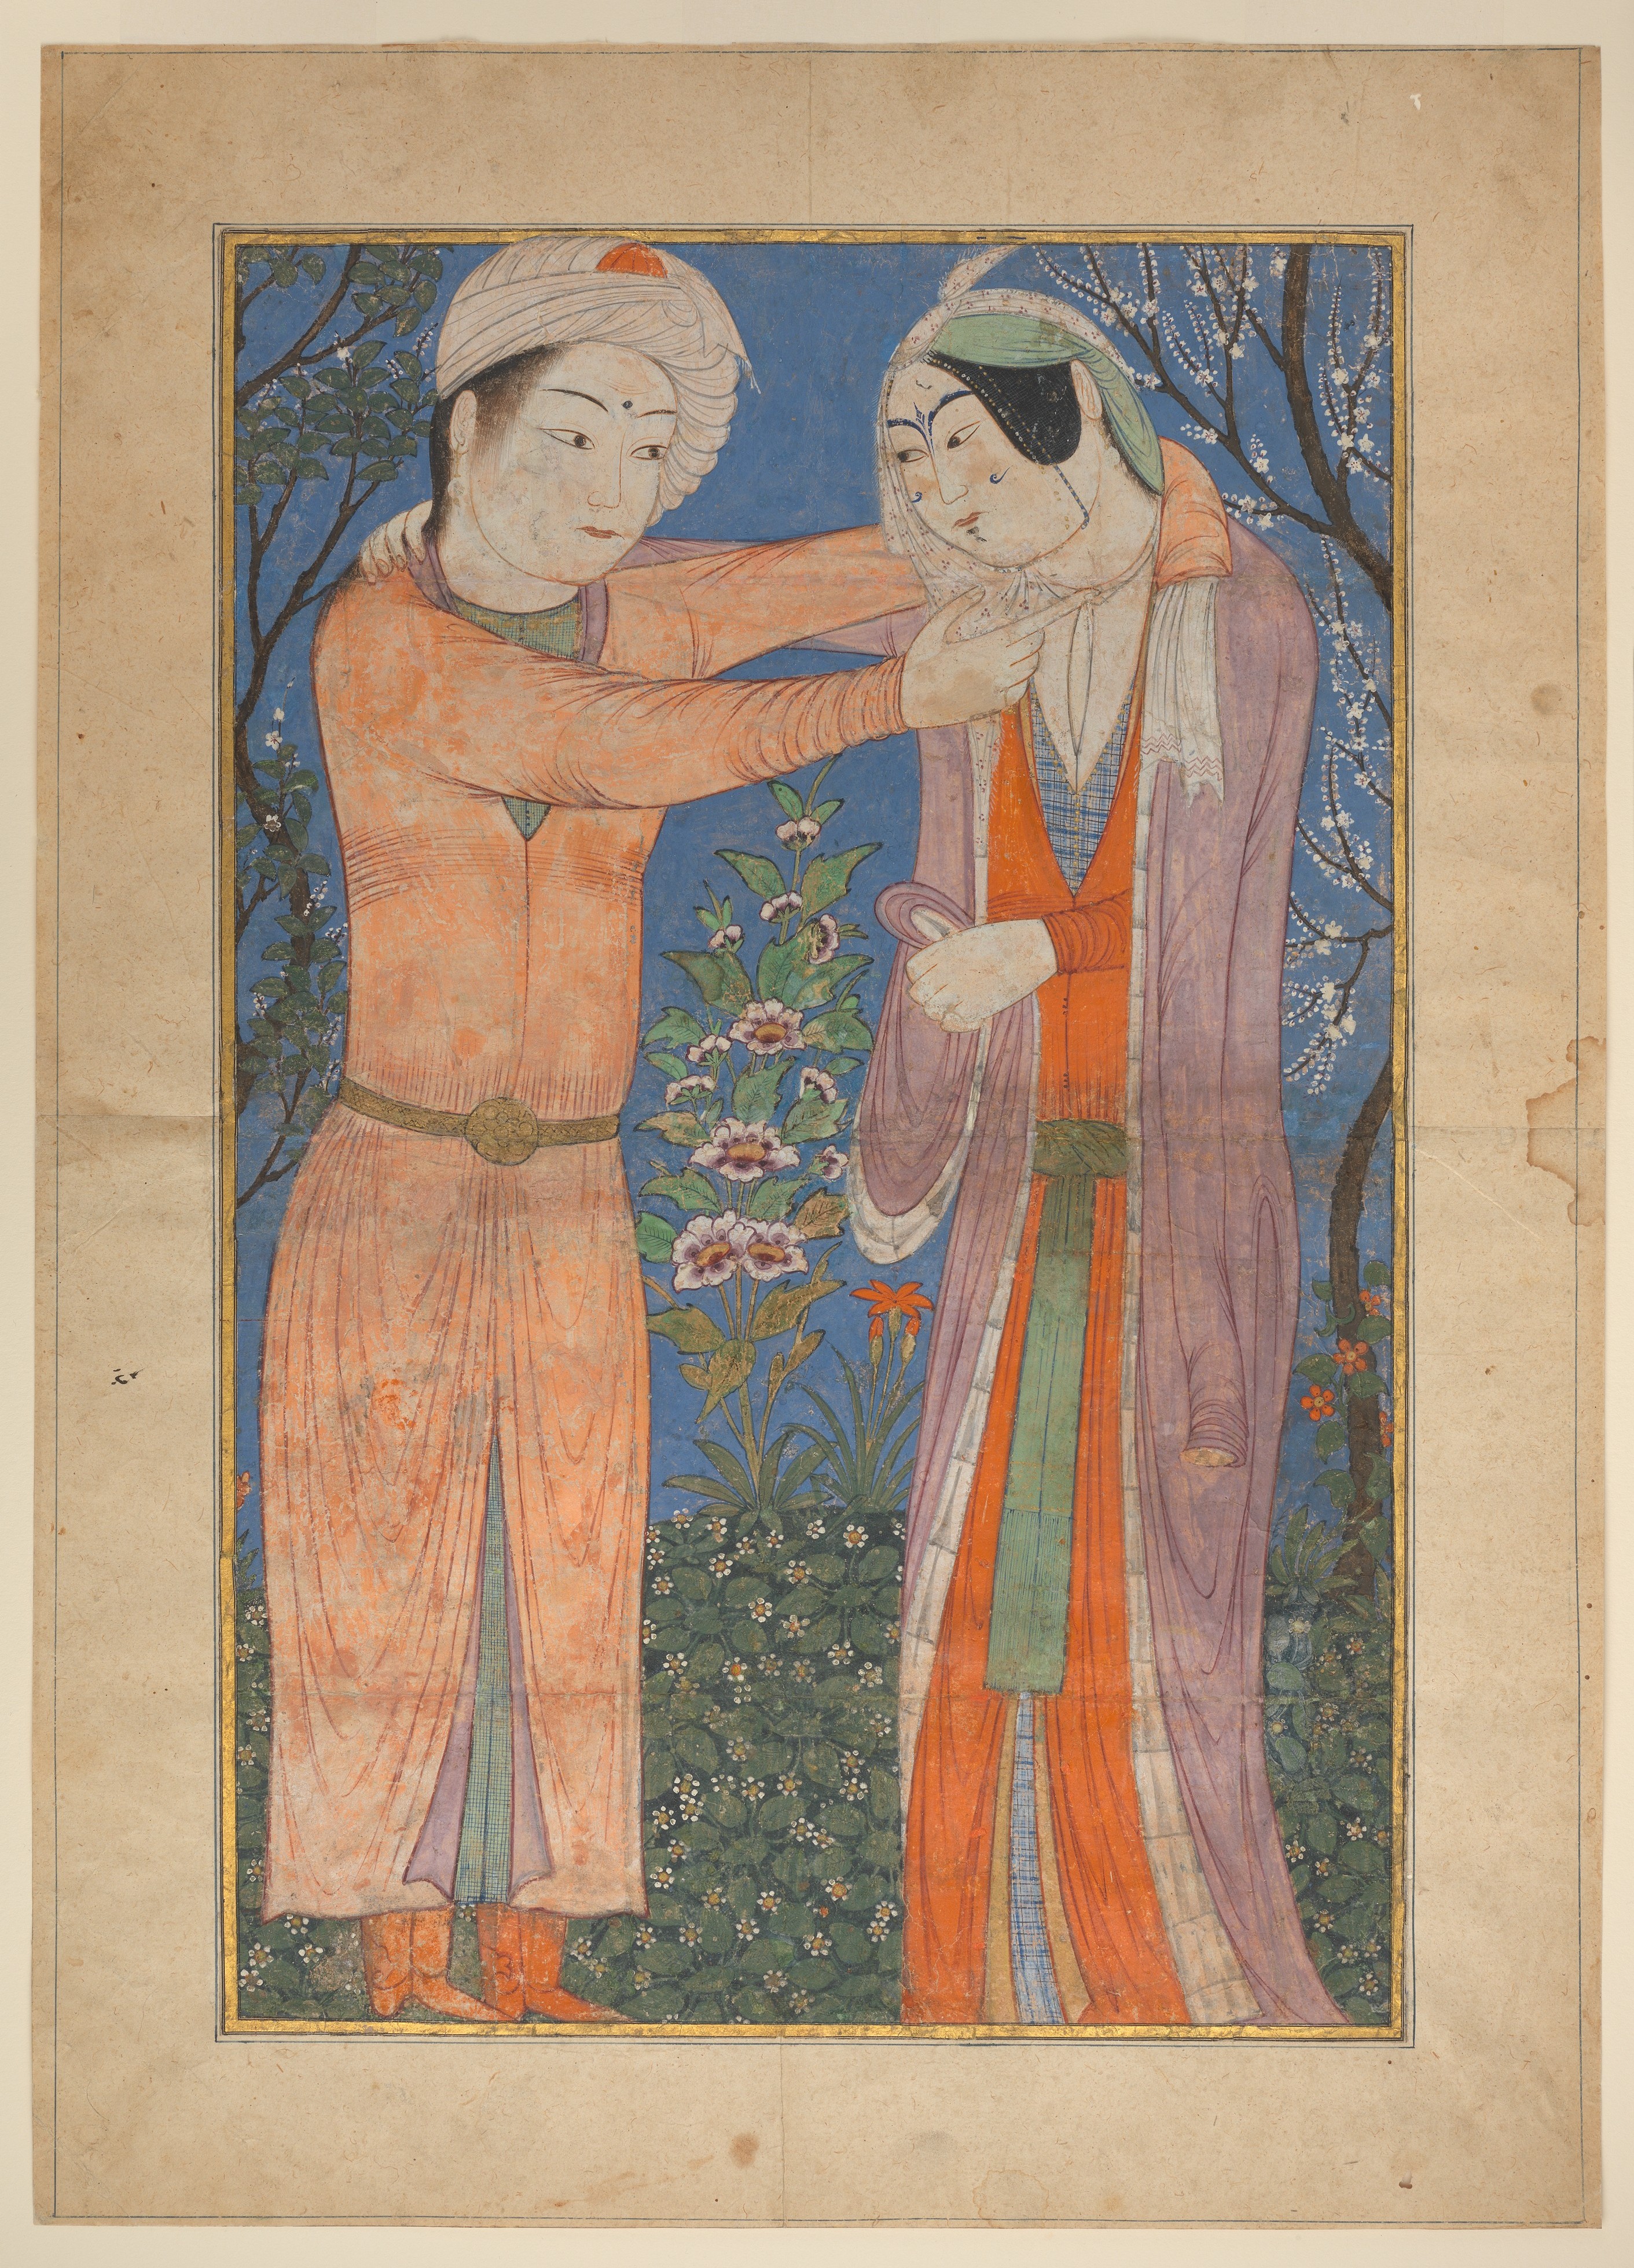 Princely Couple by Unknown Artist - 1400–1405 - 48.9 x 31.9 cm Metropolitan Museum of Art